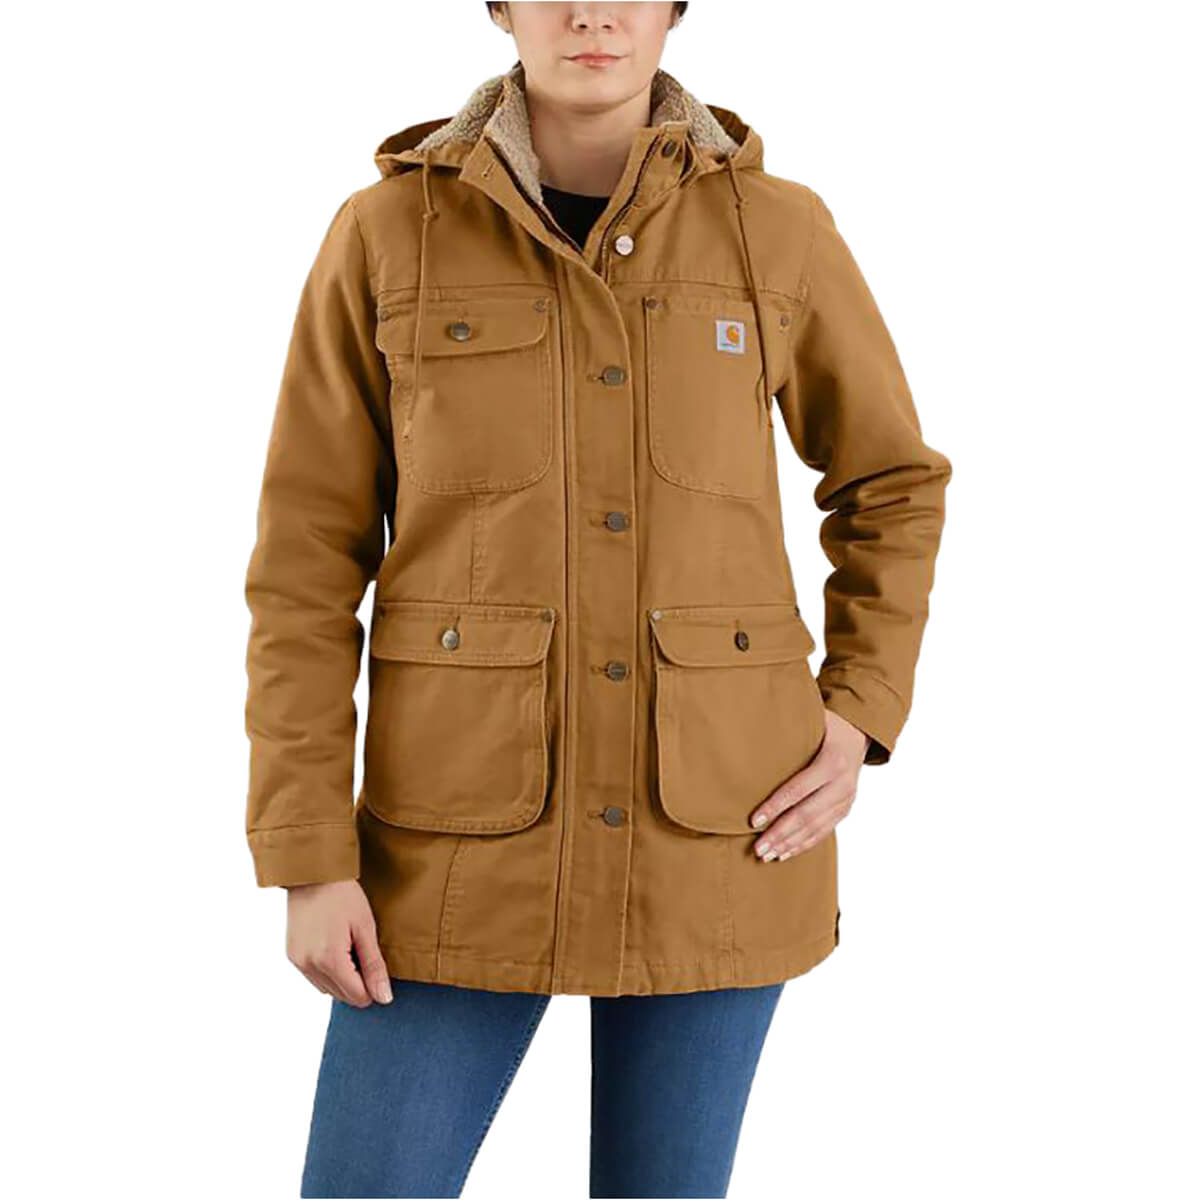 Carhartt Women's Loose Fit Washed Duck Coat - Brown